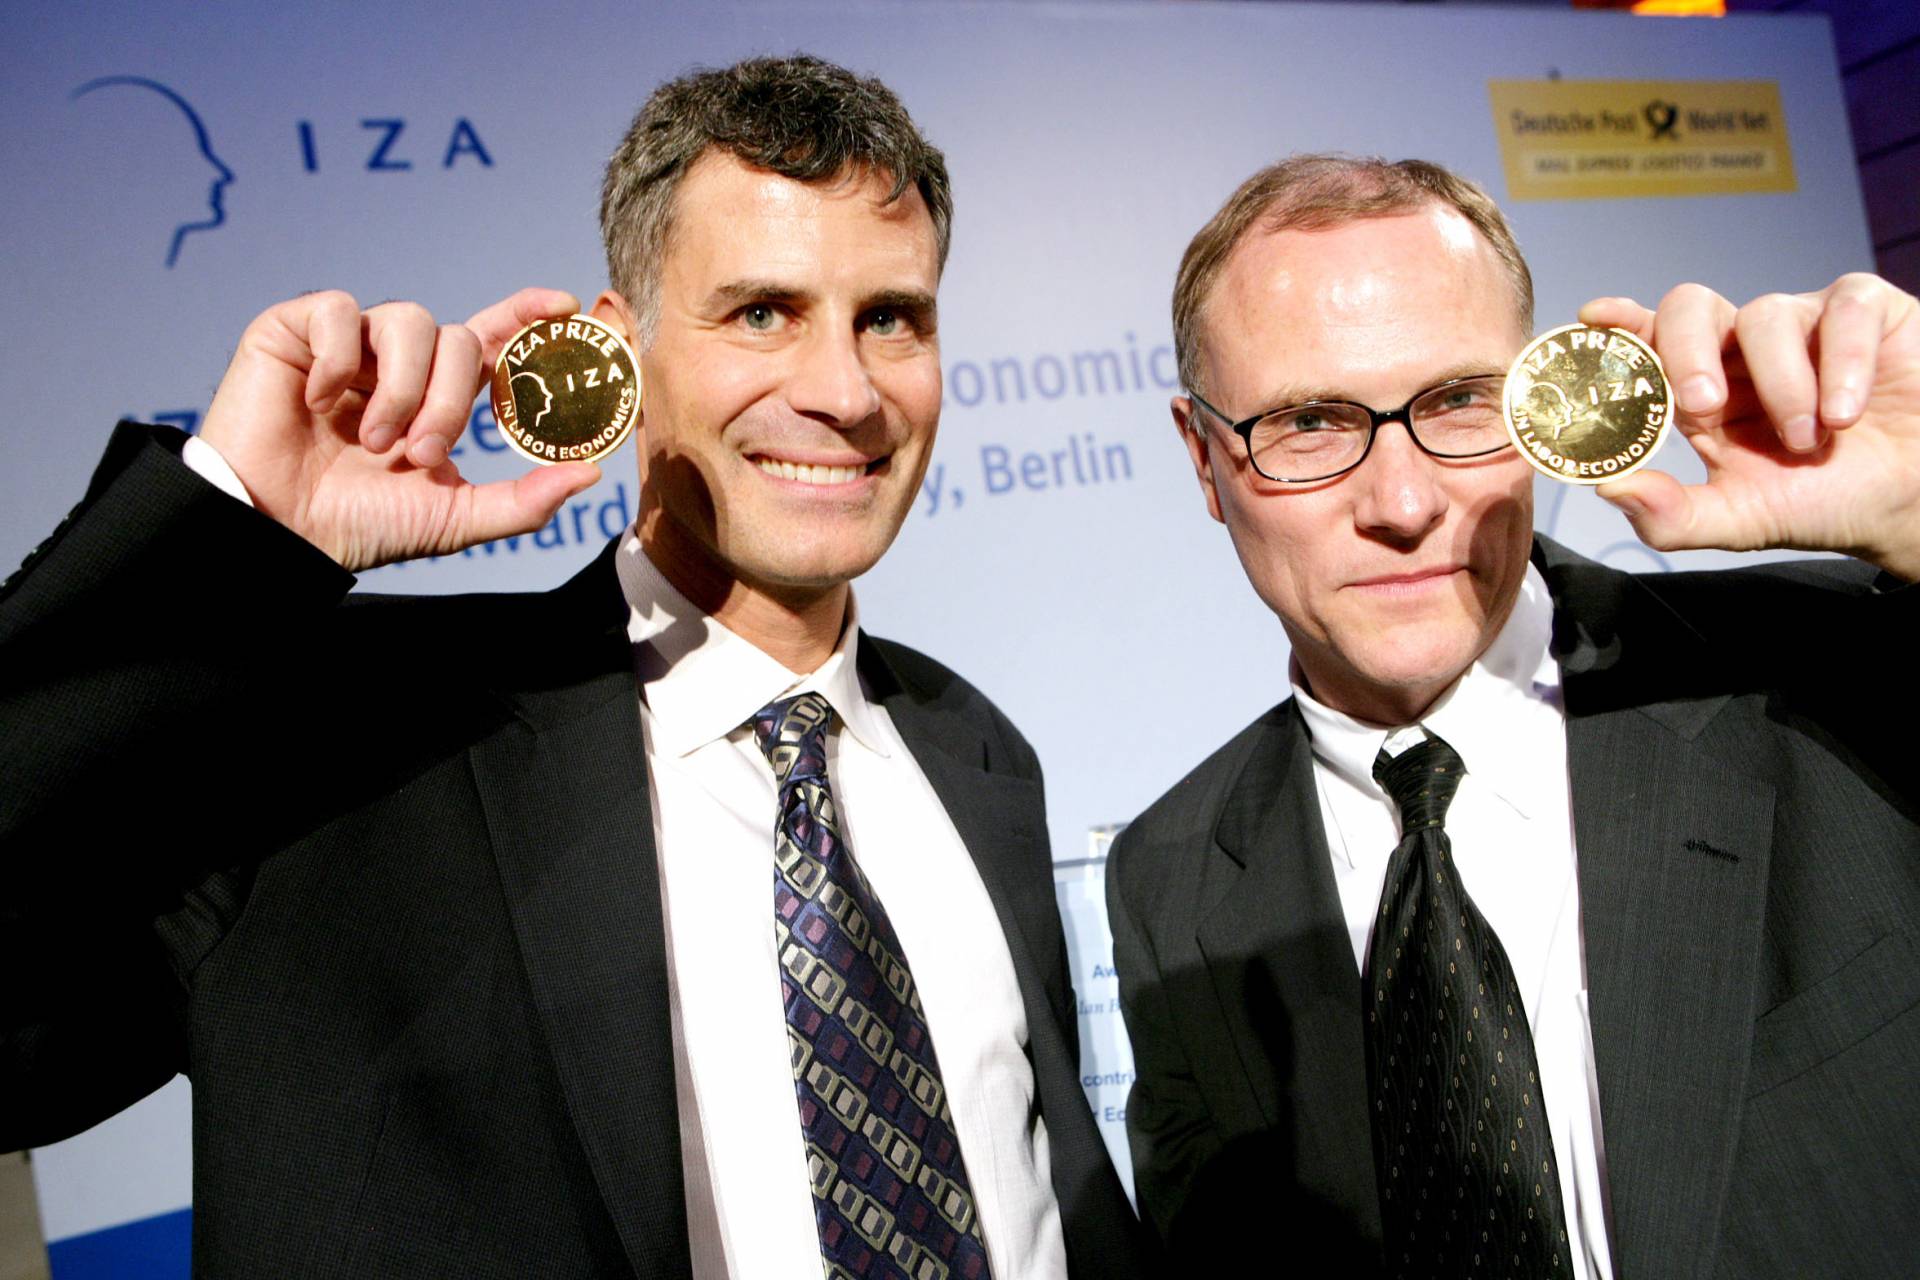 Alan Krueger and David Card hold up their IZA medals